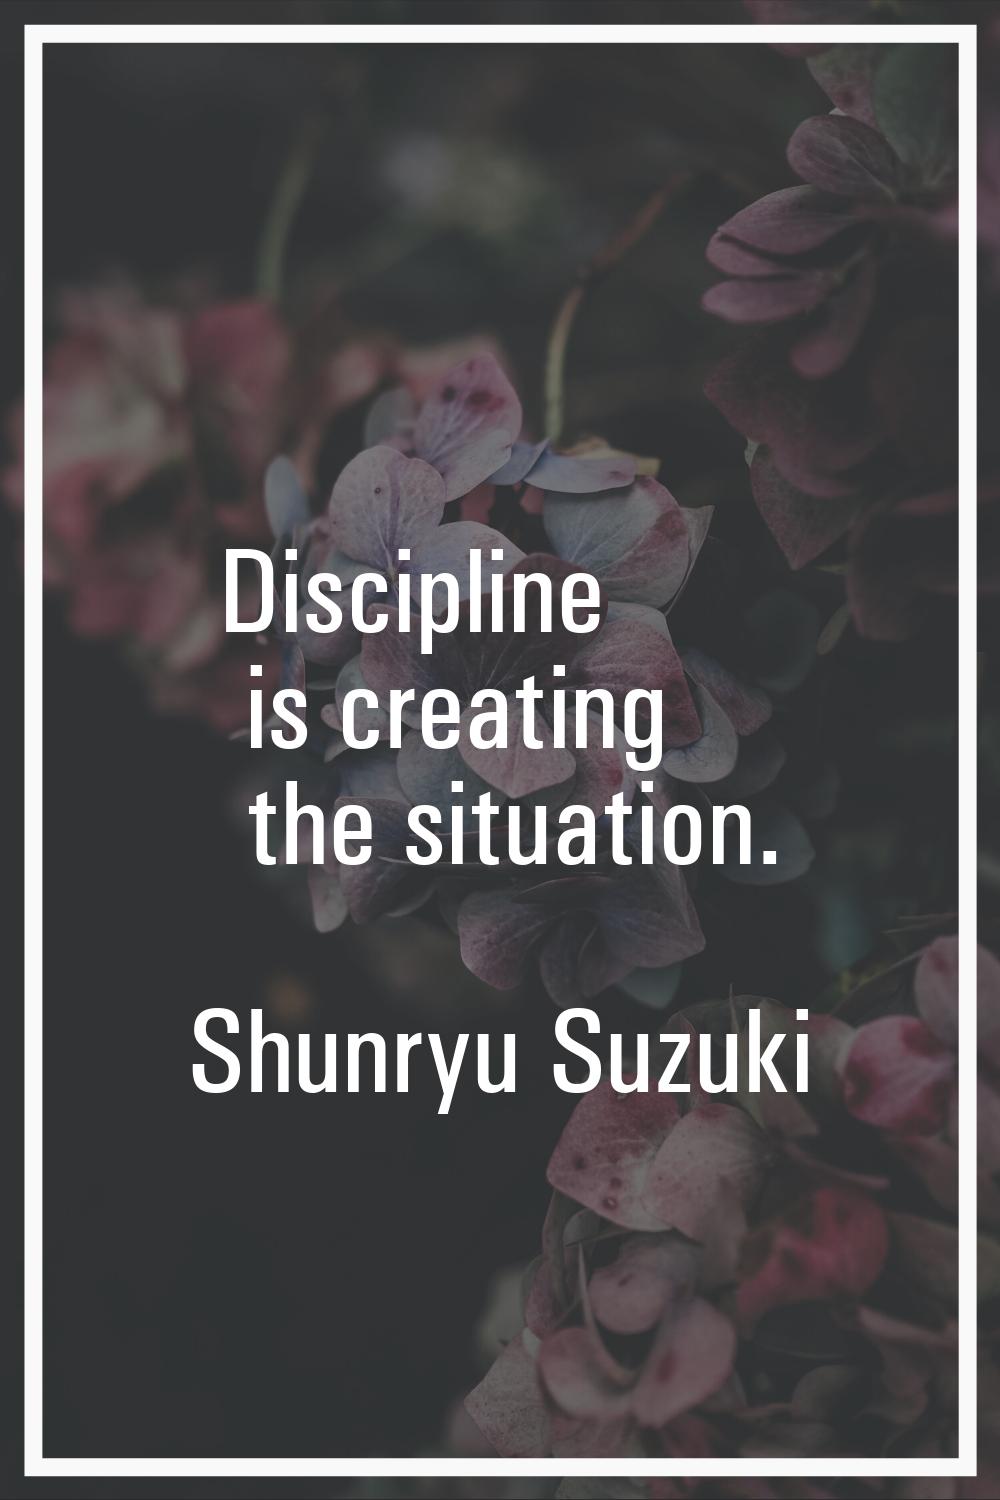 Discipline is creating the situation.